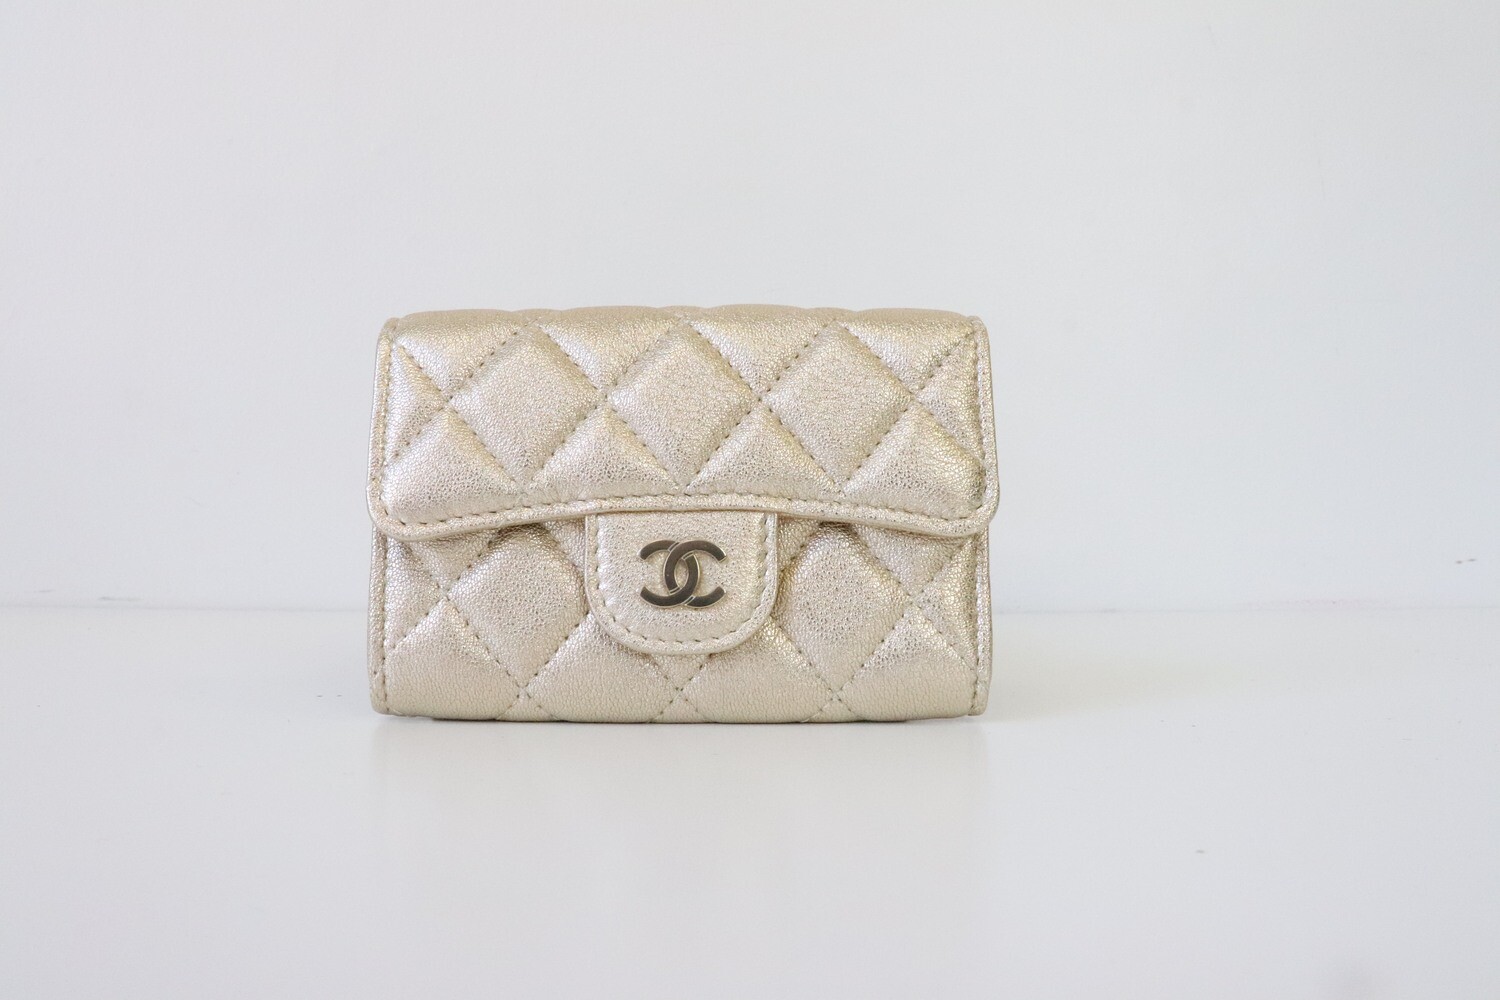 Chanel SLG Gold Wallet, New in Box